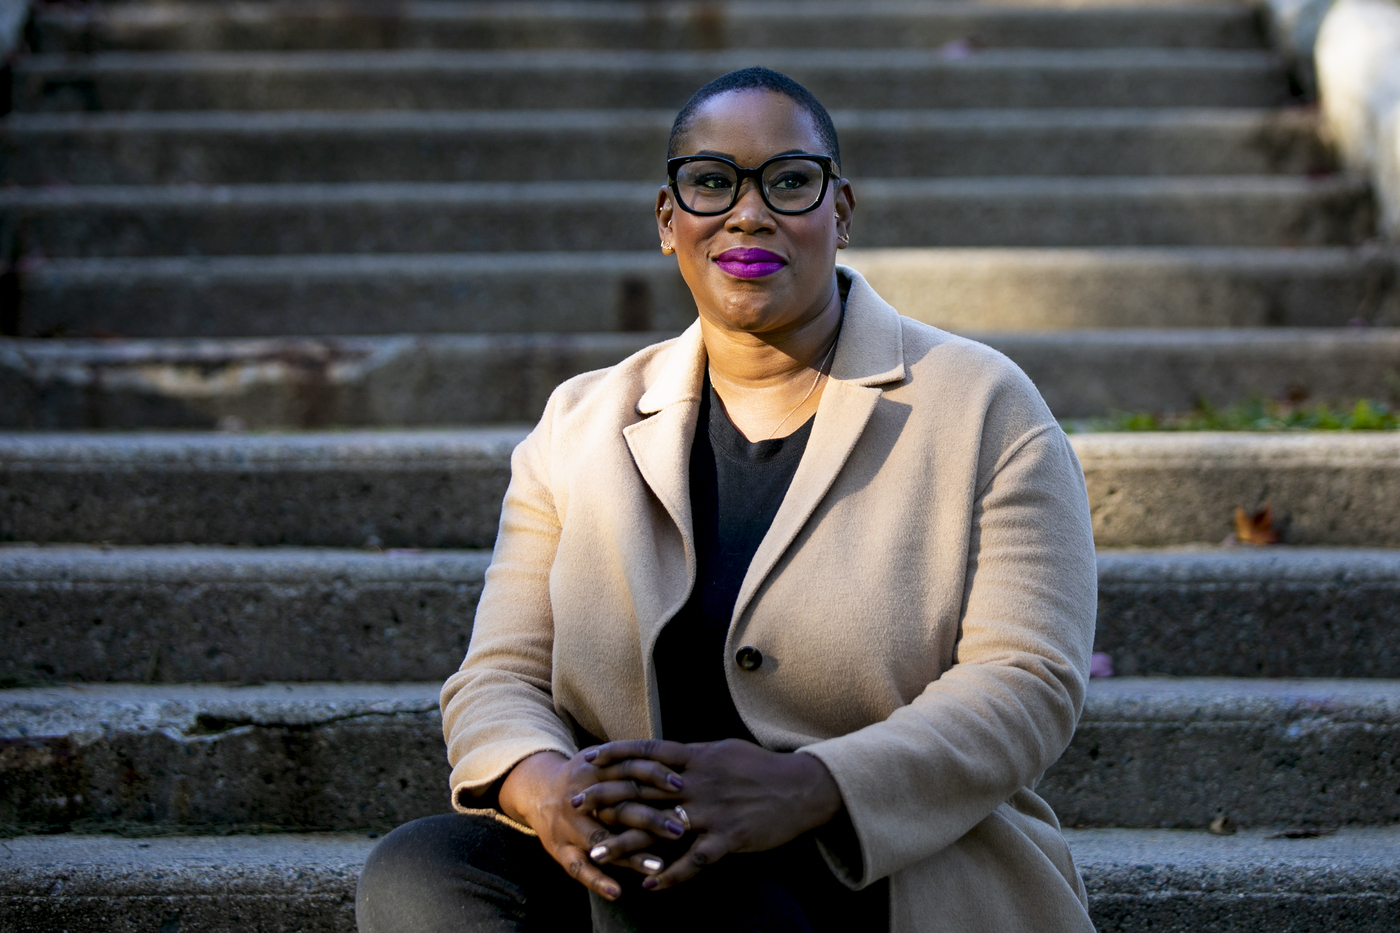 Dr. Meredith Clark, Northeastern Associate Professor and Founding Director of the new Center for Communication, Media Innovation and Social Change poses for a portrait at the Southwest Corridor Park in Jamaica Plain, Boston.